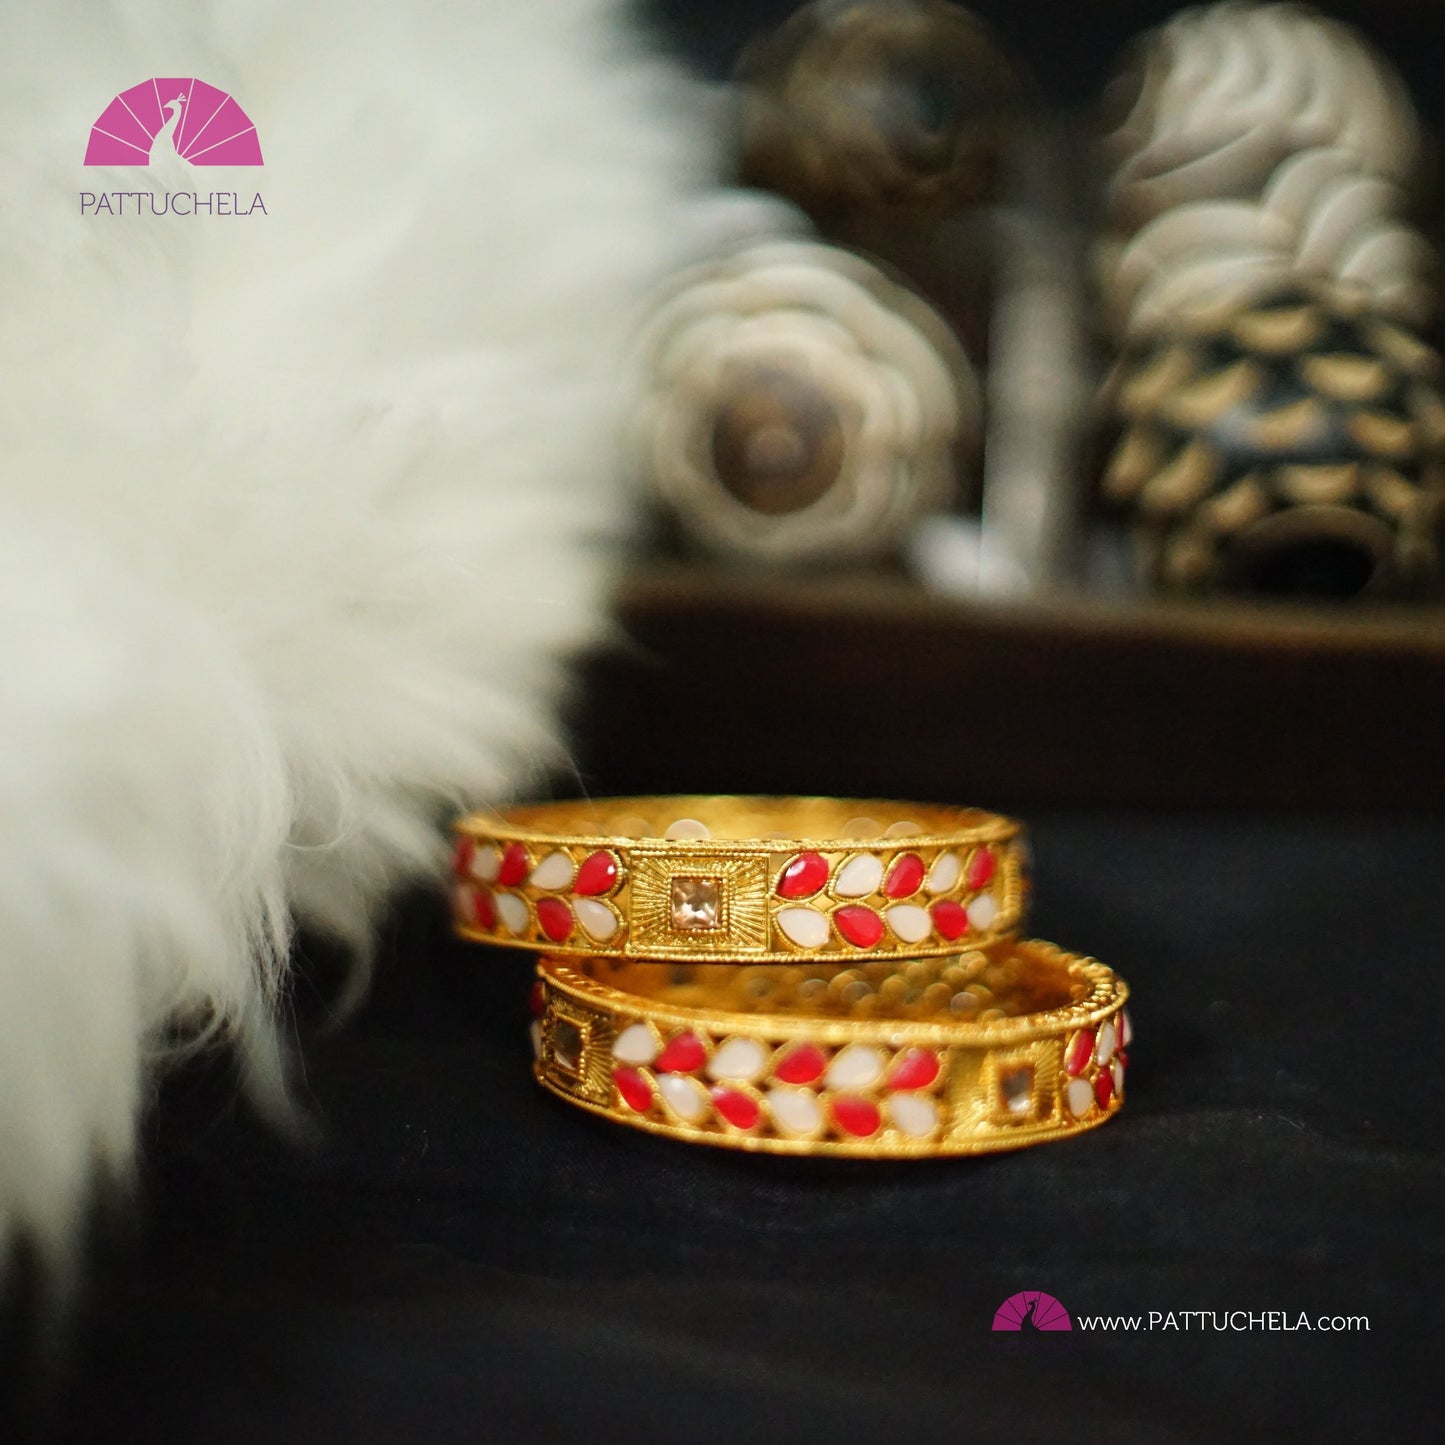 Pair of Gold Tone Bangles with Red and white stones | Gold Bangles | Kada | Fancy Jewelry | Indian Jewelry